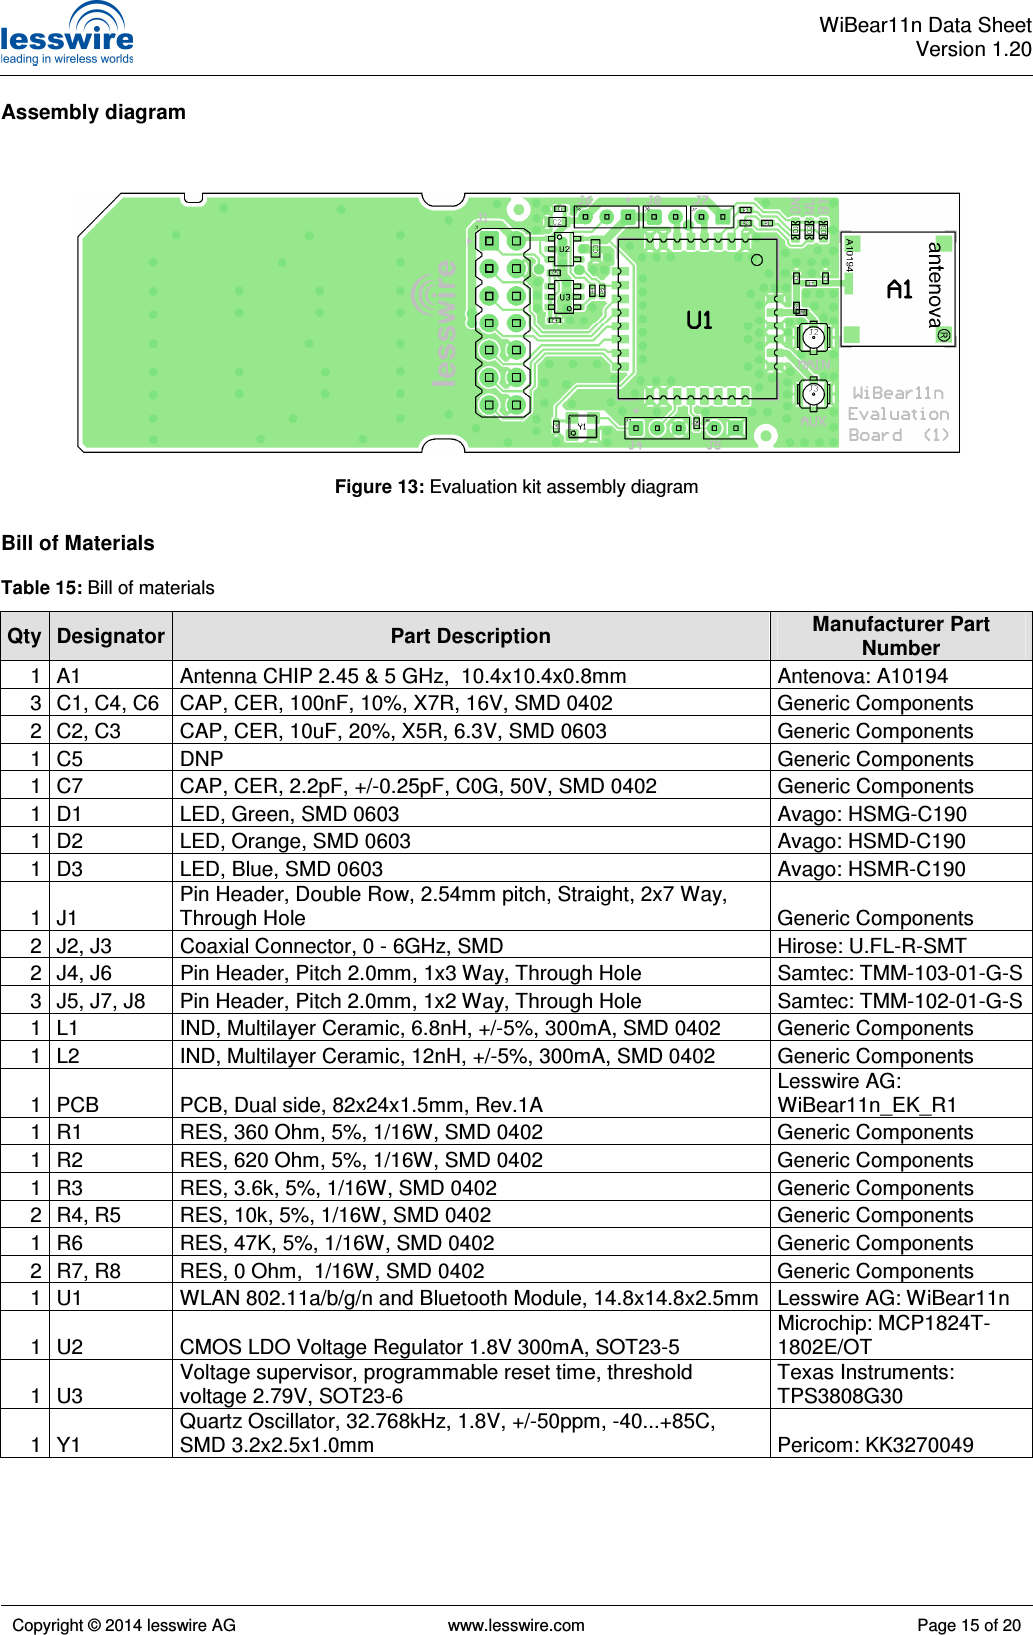  WiBear11n Data SheetVersion 1.20   Copyright © 2014 lesswire AG   www.lesswire.com  Page 15 of 20  Assembly diagram                  Bill of Materials  Table 15: Bill of materials Qty Designator Part Description Manufacturer Part Number 1 A1  Antenna CHIP 2.45 &amp; 5 GHz,  10.4x10.4x0.8mm  Antenova: A10194 3 C1, C4, C6  CAP, CER, 100nF, 10%, X7R, 16V, SMD 0402  Generic Components 2 C2, C3  CAP, CER, 10uF, 20%, X5R, 6.3V, SMD 0603  Generic Components 1 C5  DNP  Generic Components 1 C7  CAP, CER, 2.2pF, +/-0.25pF, C0G, 50V, SMD 0402  Generic Components 1 D1  LED, Green, SMD 0603  Avago: HSMG-C190 1 D2  LED, Orange, SMD 0603  Avago: HSMD-C190 1 D3  LED, Blue, SMD 0603  Avago: HSMR-C190 1 J1 Pin Header, Double Row, 2.54mm pitch, Straight, 2x7 Way, Through Hole  Generic Components 2 J2, J3  Coaxial Connector, 0 - 6GHz, SMD  Hirose: U.FL-R-SMT 2 J4, J6  Pin Header, Pitch 2.0mm, 1x3 Way, Through Hole  Samtec: TMM-103-01-G-S 3 J5, J7, J8  Pin Header, Pitch 2.0mm, 1x2 Way, Through Hole  Samtec: TMM-102-01-G-S 1 L1  IND, Multilayer Ceramic, 6.8nH, +/-5%, 300mA, SMD 0402  Generic Components 1 L2  IND, Multilayer Ceramic, 12nH, +/-5%, 300mA, SMD 0402  Generic Components 1 PCB  PCB, Dual side, 82x24x1.5mm, Rev.1A Lesswire AG: WiBear11n_EK_R1 1 R1  RES, 360 Ohm, 5%, 1/16W, SMD 0402  Generic Components 1 R2  RES, 620 Ohm, 5%, 1/16W, SMD 0402  Generic Components 1 R3  RES, 3.6k, 5%, 1/16W, SMD 0402  Generic Components 2 R4, R5  RES, 10k, 5%, 1/16W, SMD 0402  Generic Components 1 R6  RES, 47K, 5%, 1/16W, SMD 0402  Generic Components 2 R7, R8  RES, 0 Ohm,  1/16W, SMD 0402  Generic Components 1 U1  WLAN 802.11a/b/g/n and Bluetooth Module, 14.8x14.8x2.5mm Lesswire AG: WiBear11n 1 U2  CMOS LDO Voltage Regulator 1.8V 300mA, SOT23-5 Microchip: MCP1824T-1802E/OT 1 U3 Voltage supervisor, programmable reset time, threshold voltage 2.79V, SOT23-6 Texas Instruments: TPS3808G30 1 Y1 Quartz Oscillator, 32.768kHz, 1.8V, +/-50ppm, -40...+85C, SMD 3.2x2.5x1.0mm  Pericom: KK3270049 Figure 13: Evaluation kit assembly diagram 